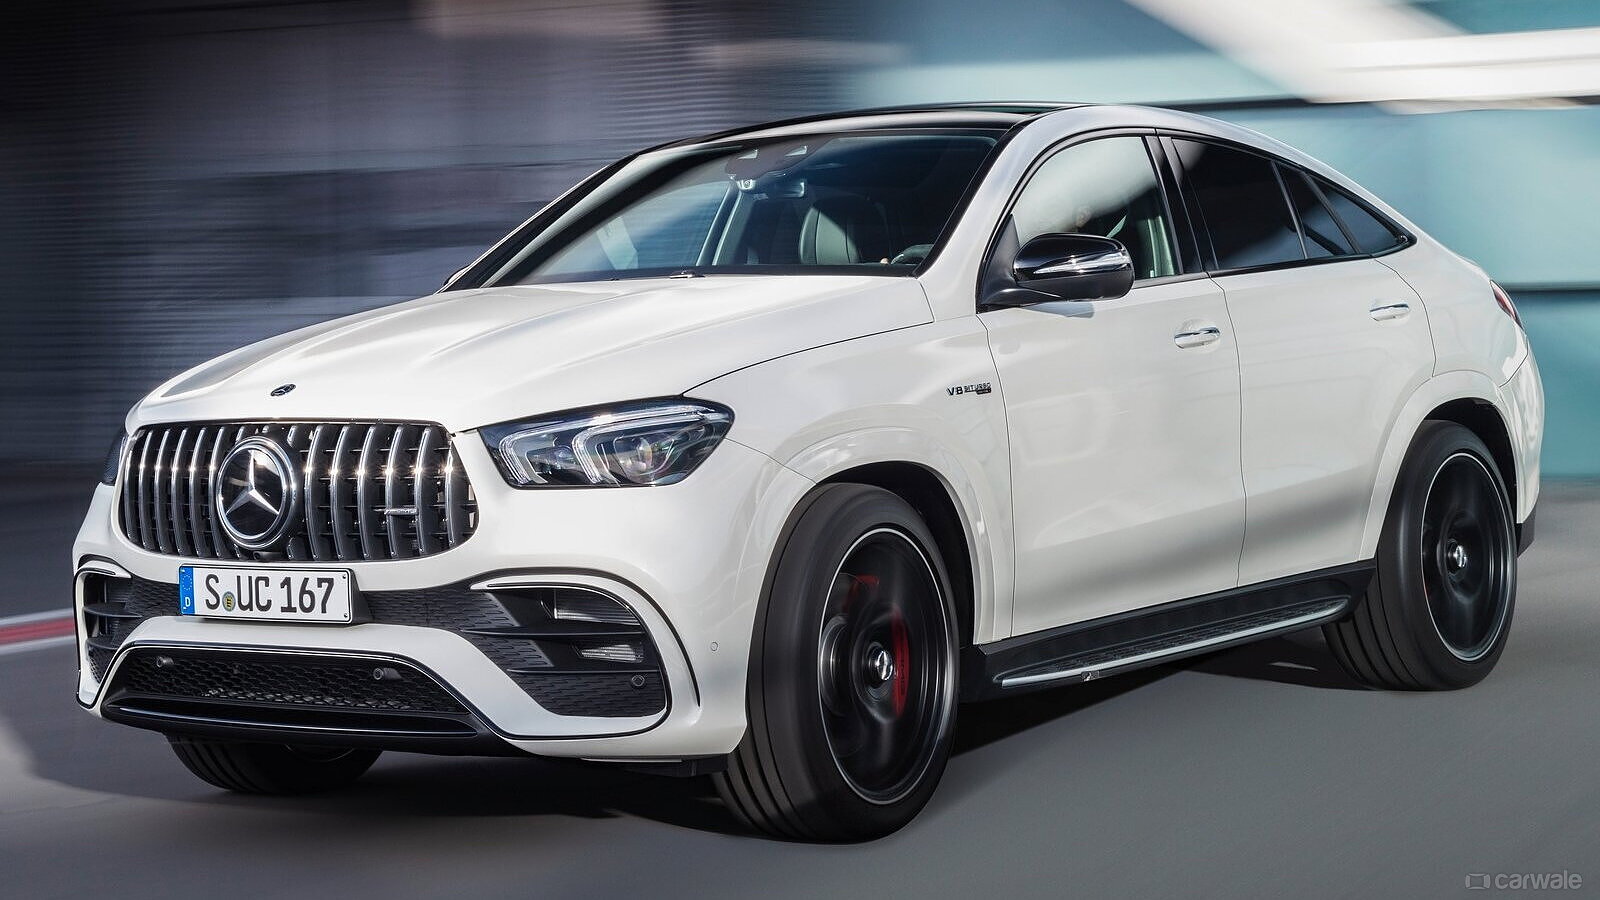 Mercedes Amg Gle 63 S Coupe Launched In India At Rs 2 07 Crore Carwale